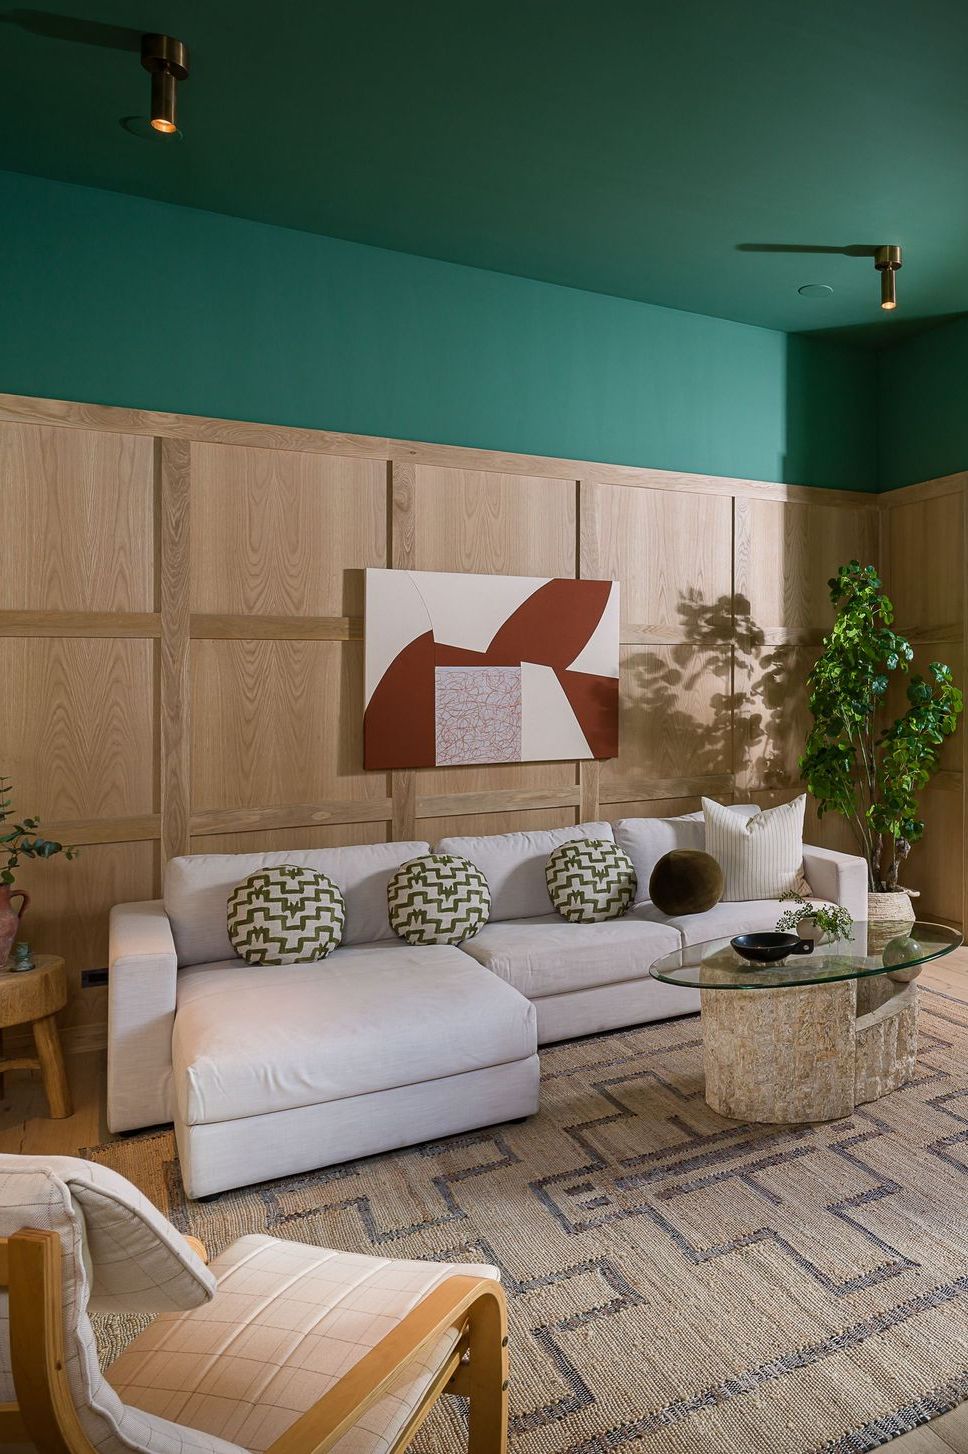 living room with green walls and wood paneling